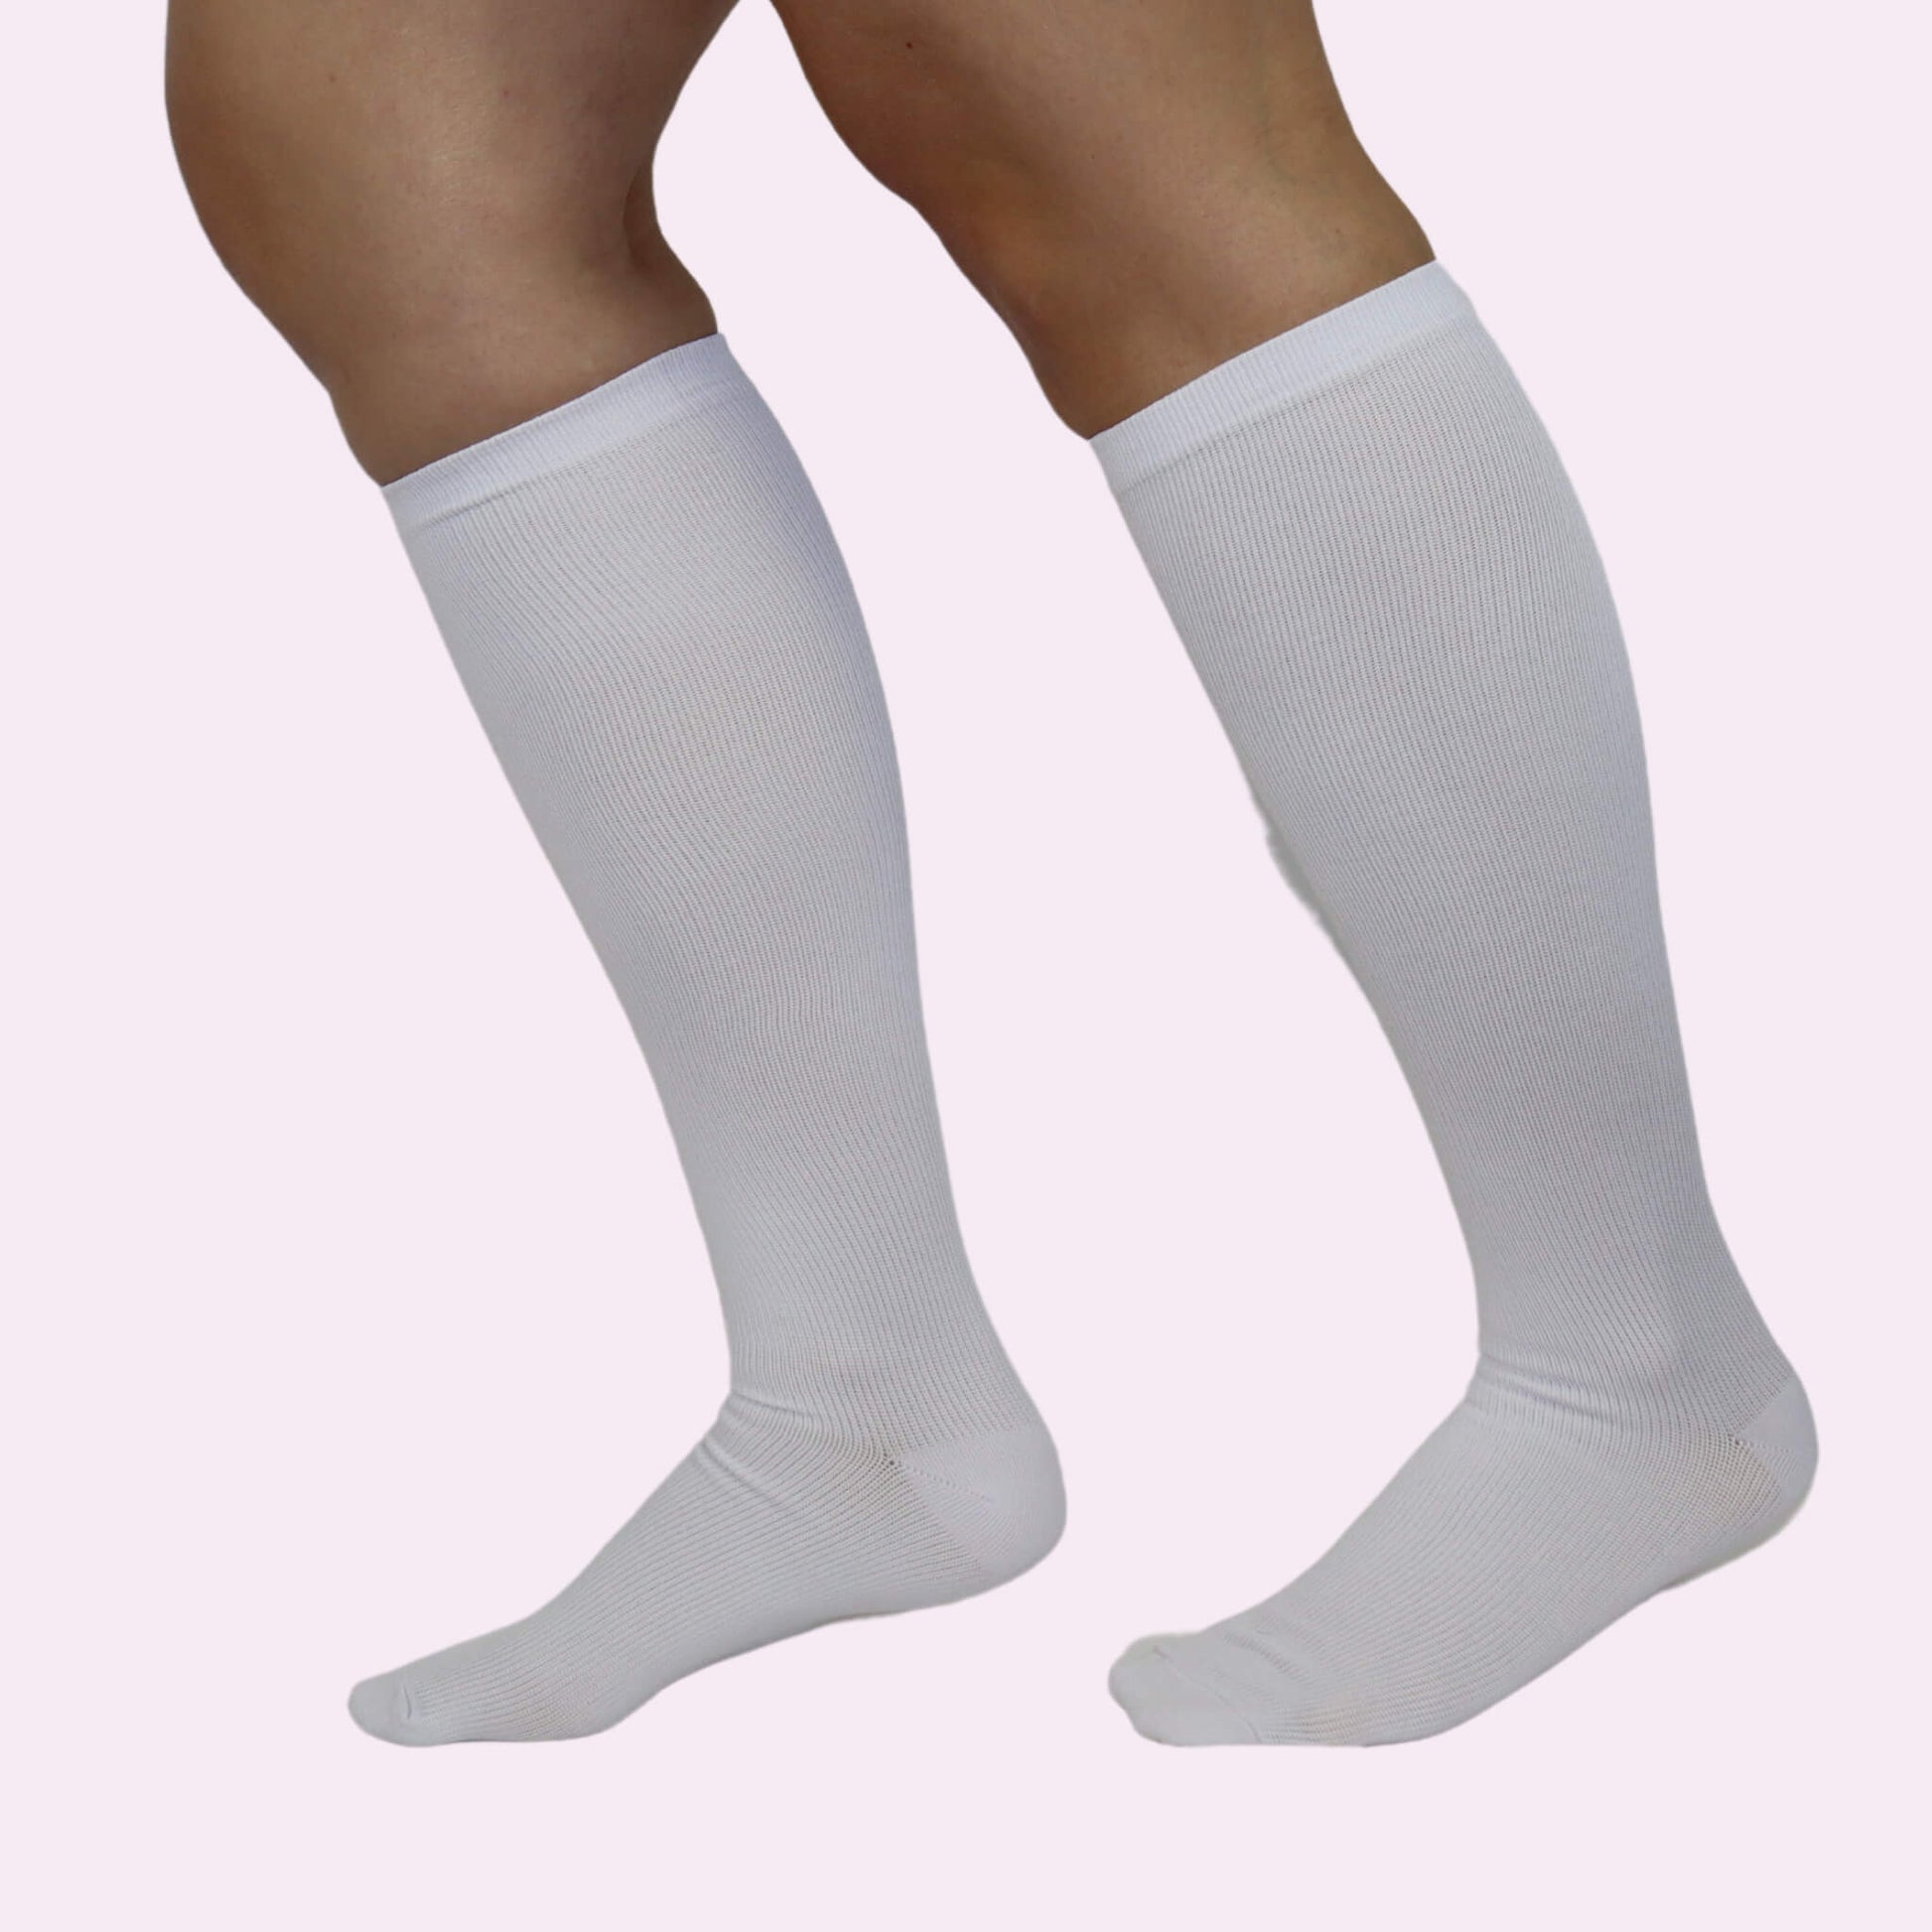 White Compression Socks | Knee Length from Fit Right Medical Scrubs